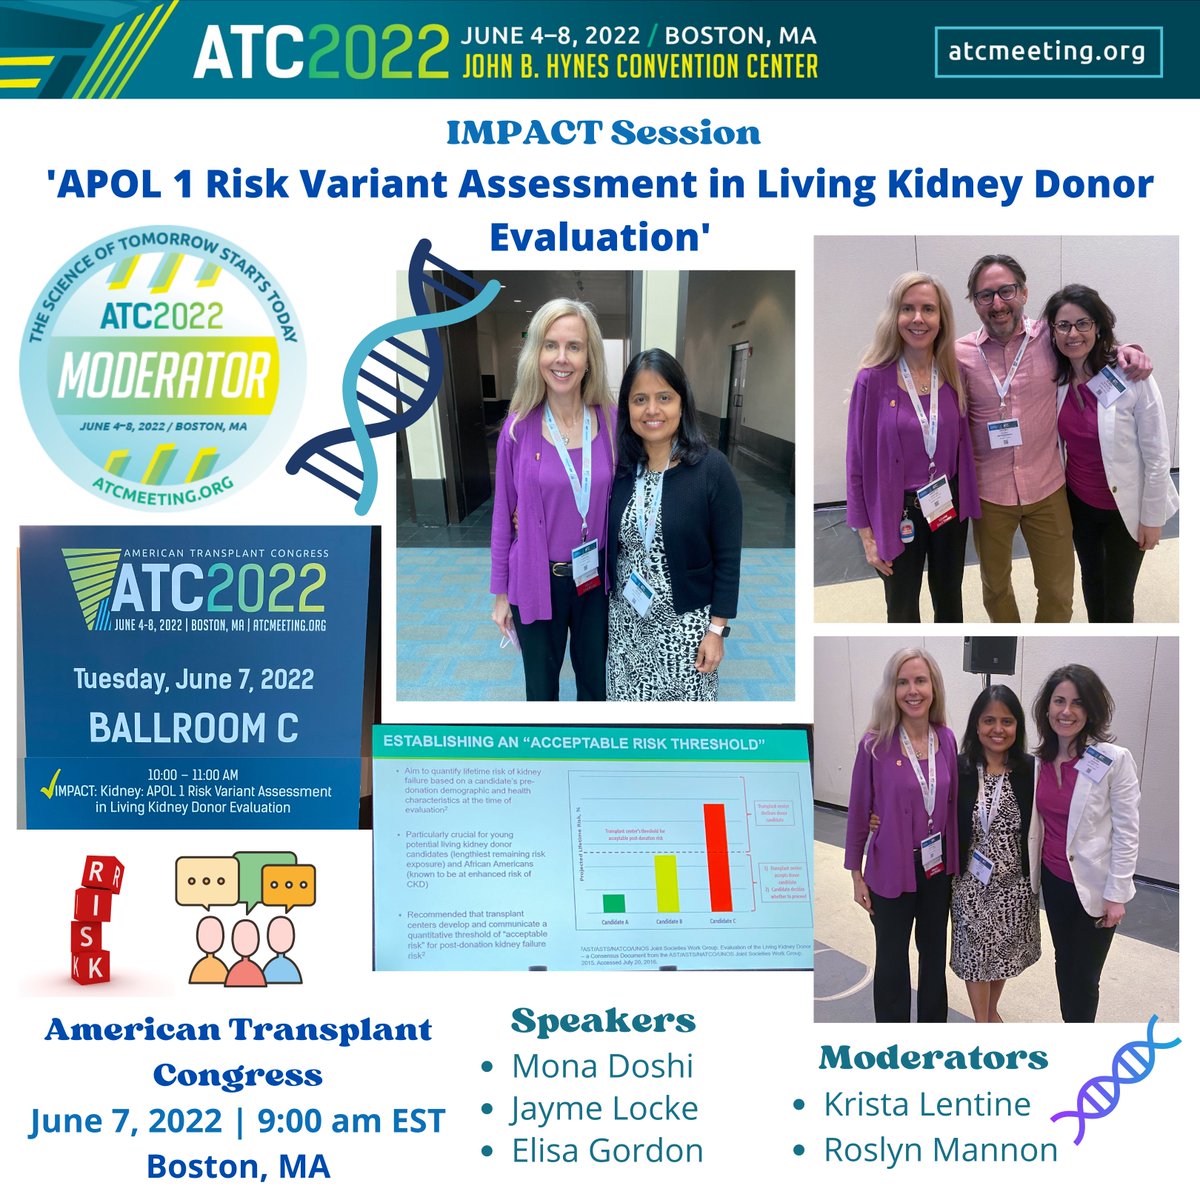 🙏🏾Honored to co-moderate🎙️'#APOL1 Risk Variant Assessment in #LivingKidneyDonor Evaluation' w/@mannonmom
• Experts @MonaDoshiMD #JaymeLocke➕ @ElisaJGordon debate benefits➕unintended consequences of APOL1 genotyping in #LivingDonor evaluation➕tools for shared #decisionmaking🤲🏾